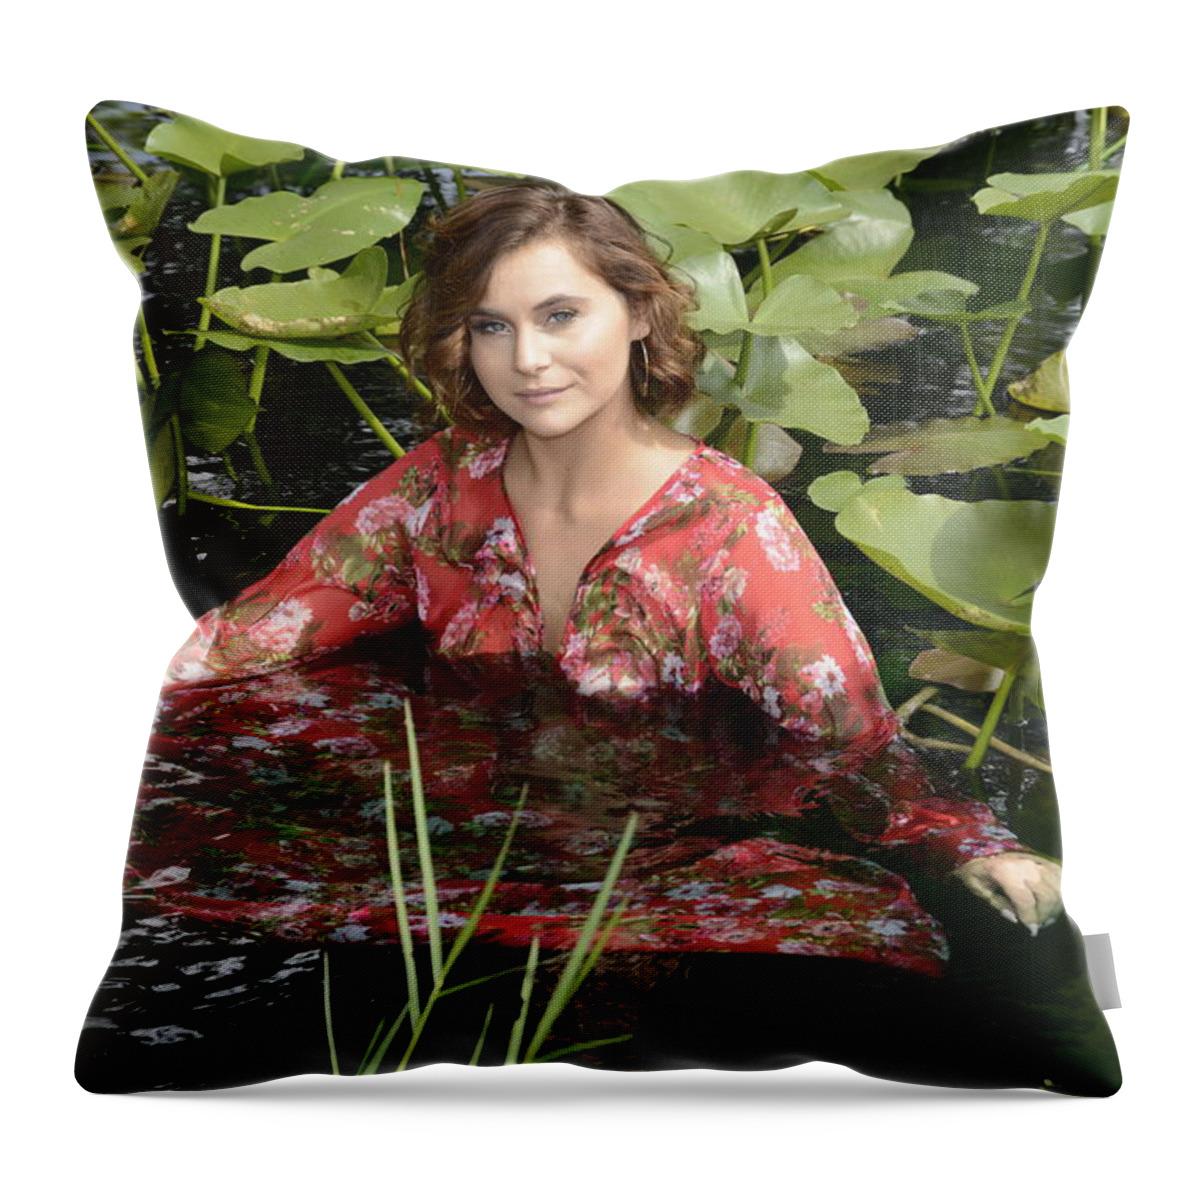  Throw Pillow featuring the photograph Cooling Off by Keith Lovejoy